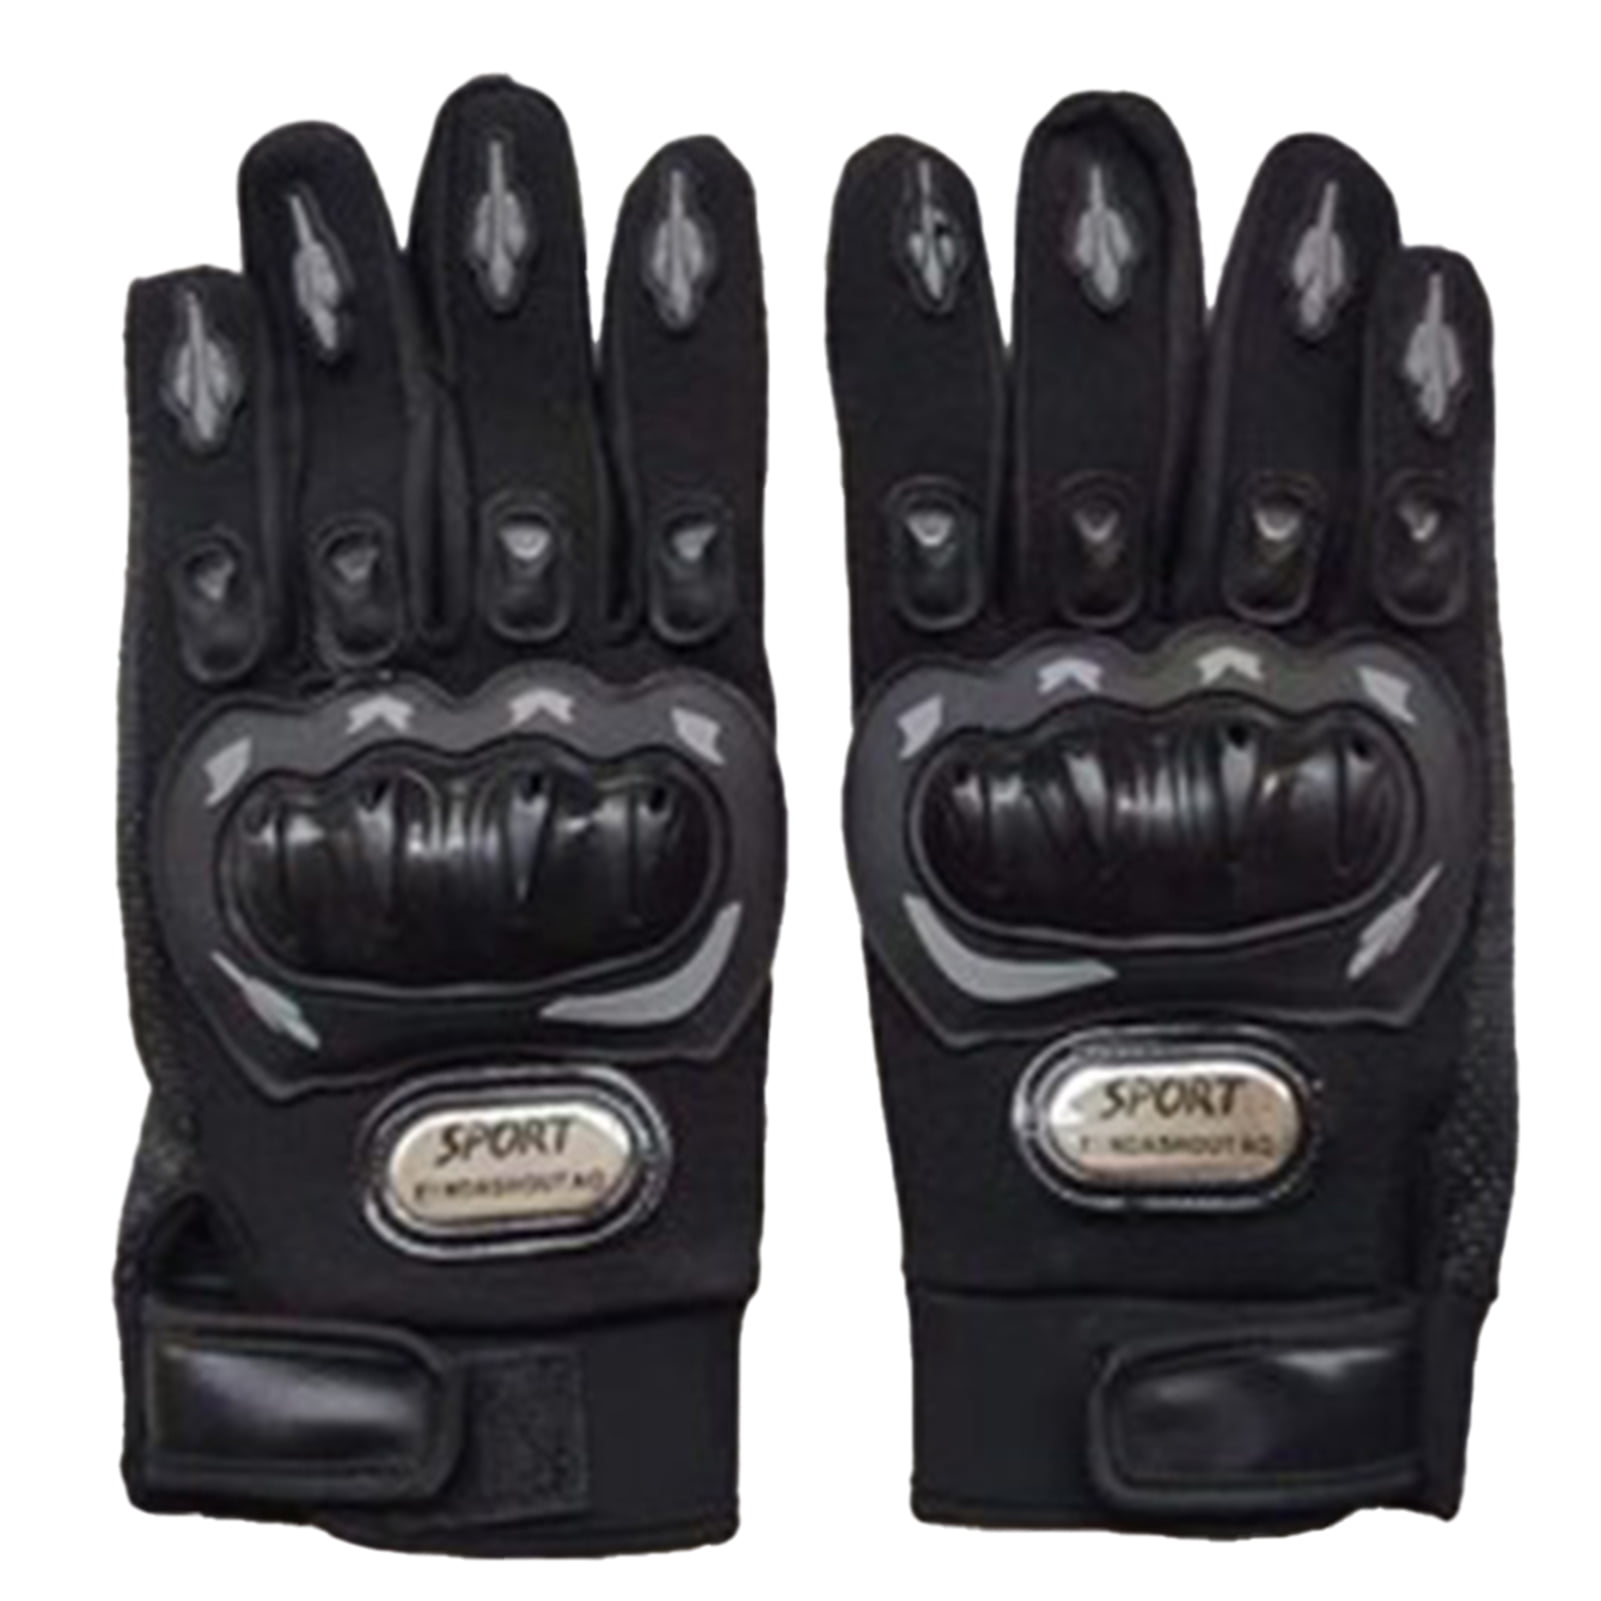 Unisex Touchscreen Leather Gloves Motorcycle Full Finger Protect Racing Mitten